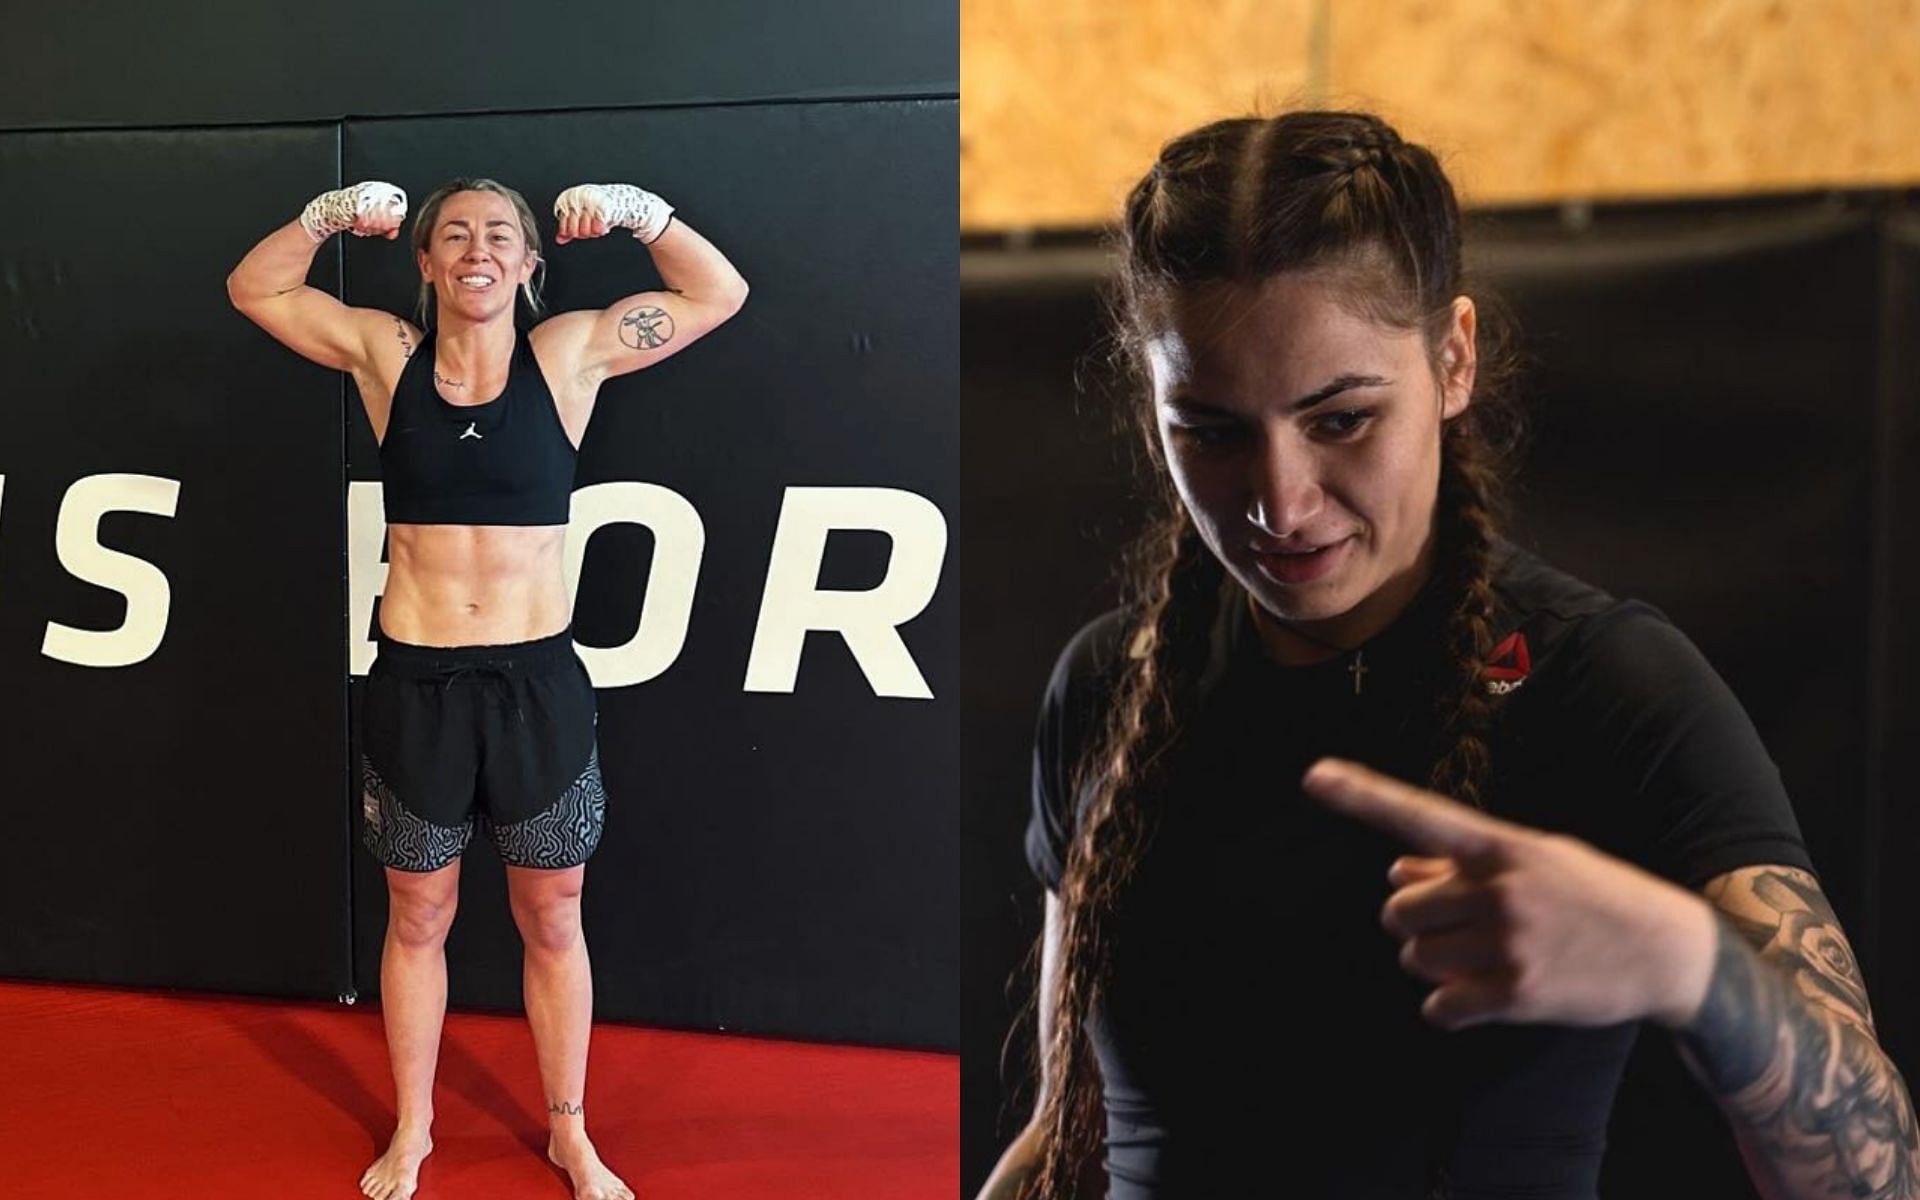 Molly McCann (left) reacts to accusations of avoiding a face-off with Diana Belbita (right) ahead of UFC Vegas 85 [Photo Courtesy @meatballmolly and @dianabelbita on Instagram]